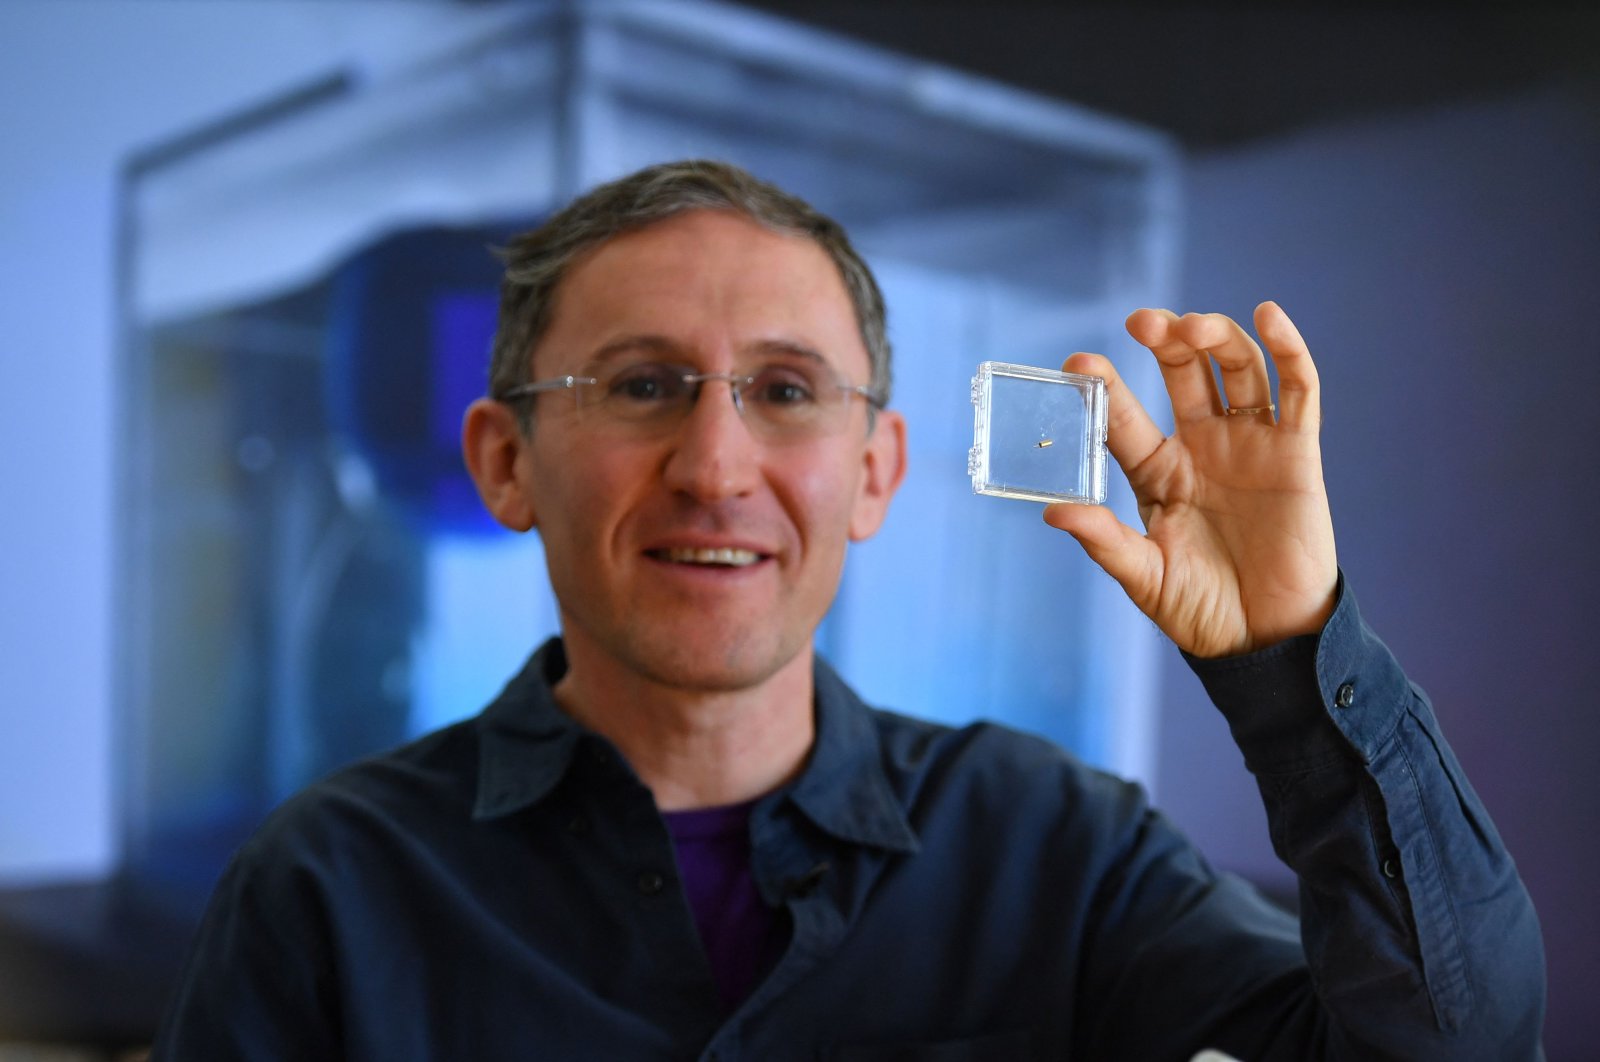 Bionaut Labs CEO and founder Michael Shpigelmacher displays various model of tiny remote-controlled medical micro-robots called Bionauts which his company is developing as a new modality for delivering treatments, in their lab in Los Angeles, California, March 17, 2022. (AFP Photo)